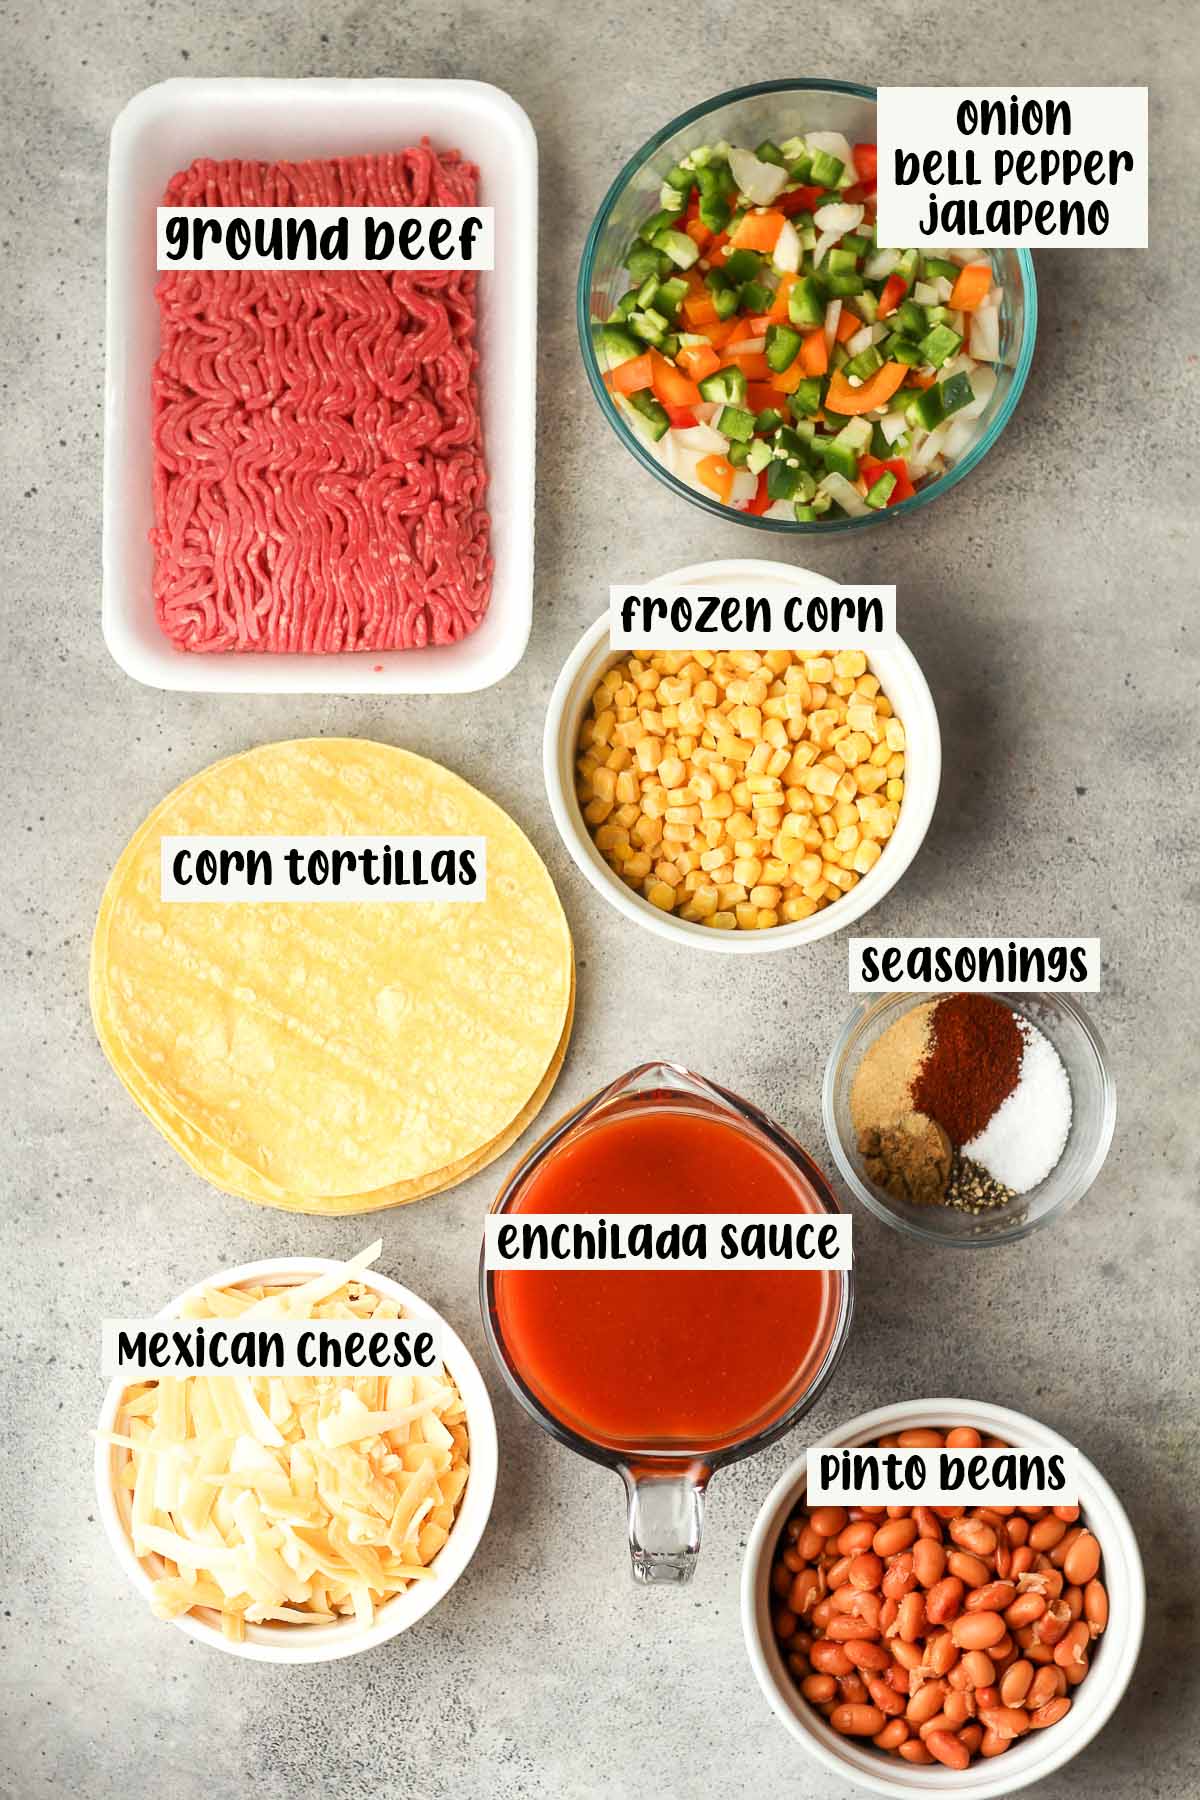 The labeled ingredients for the skillet beef enchiladas.